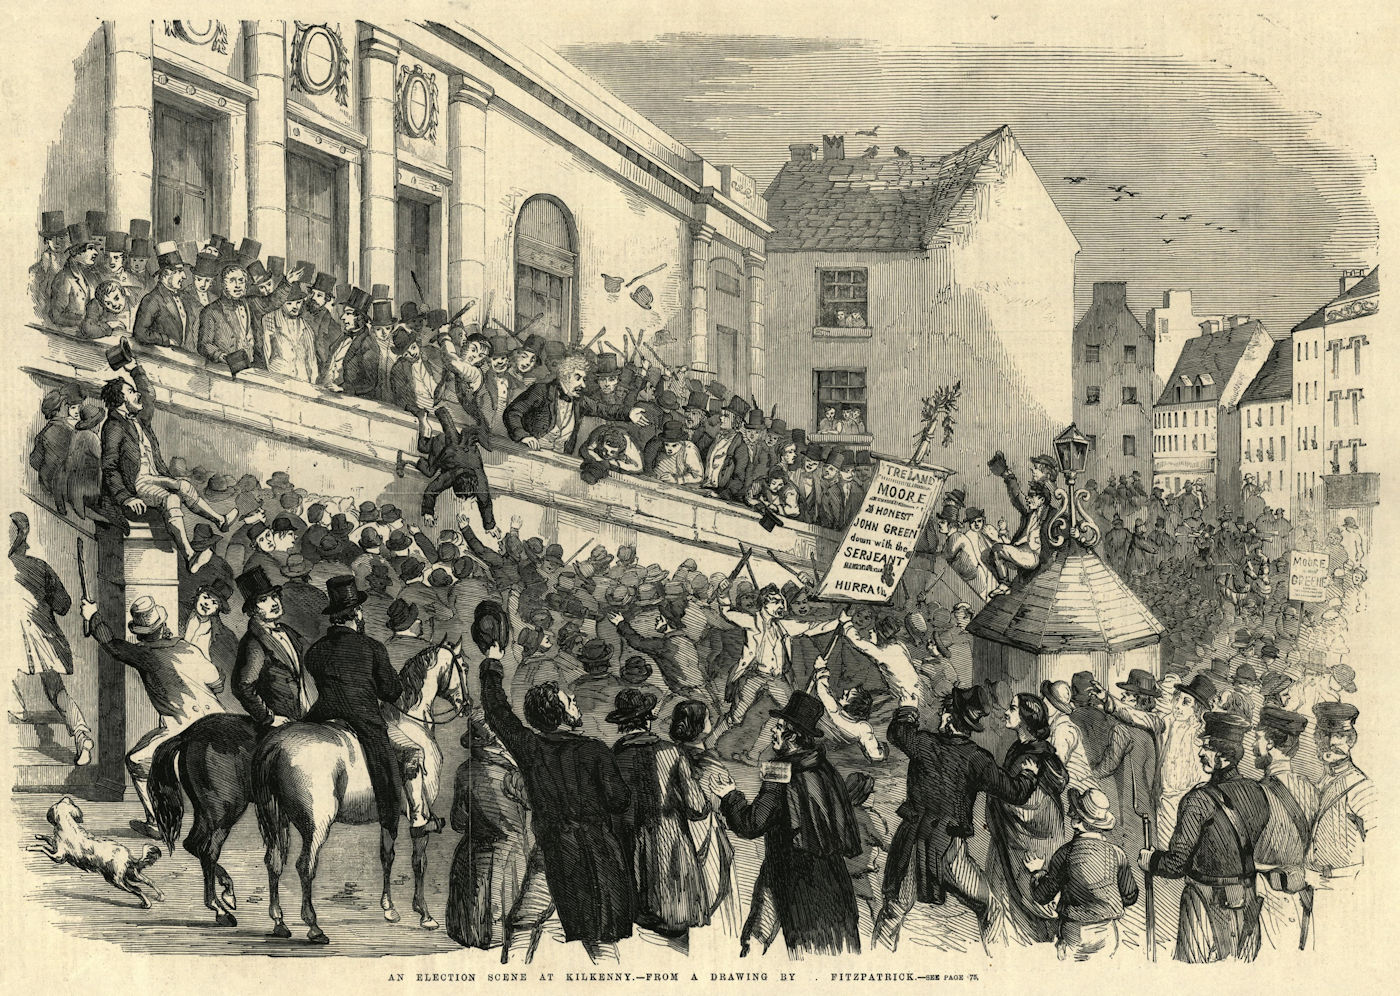 Associate Product An election scene at Kilkenny. Ireland 1859 antique ILN full page print